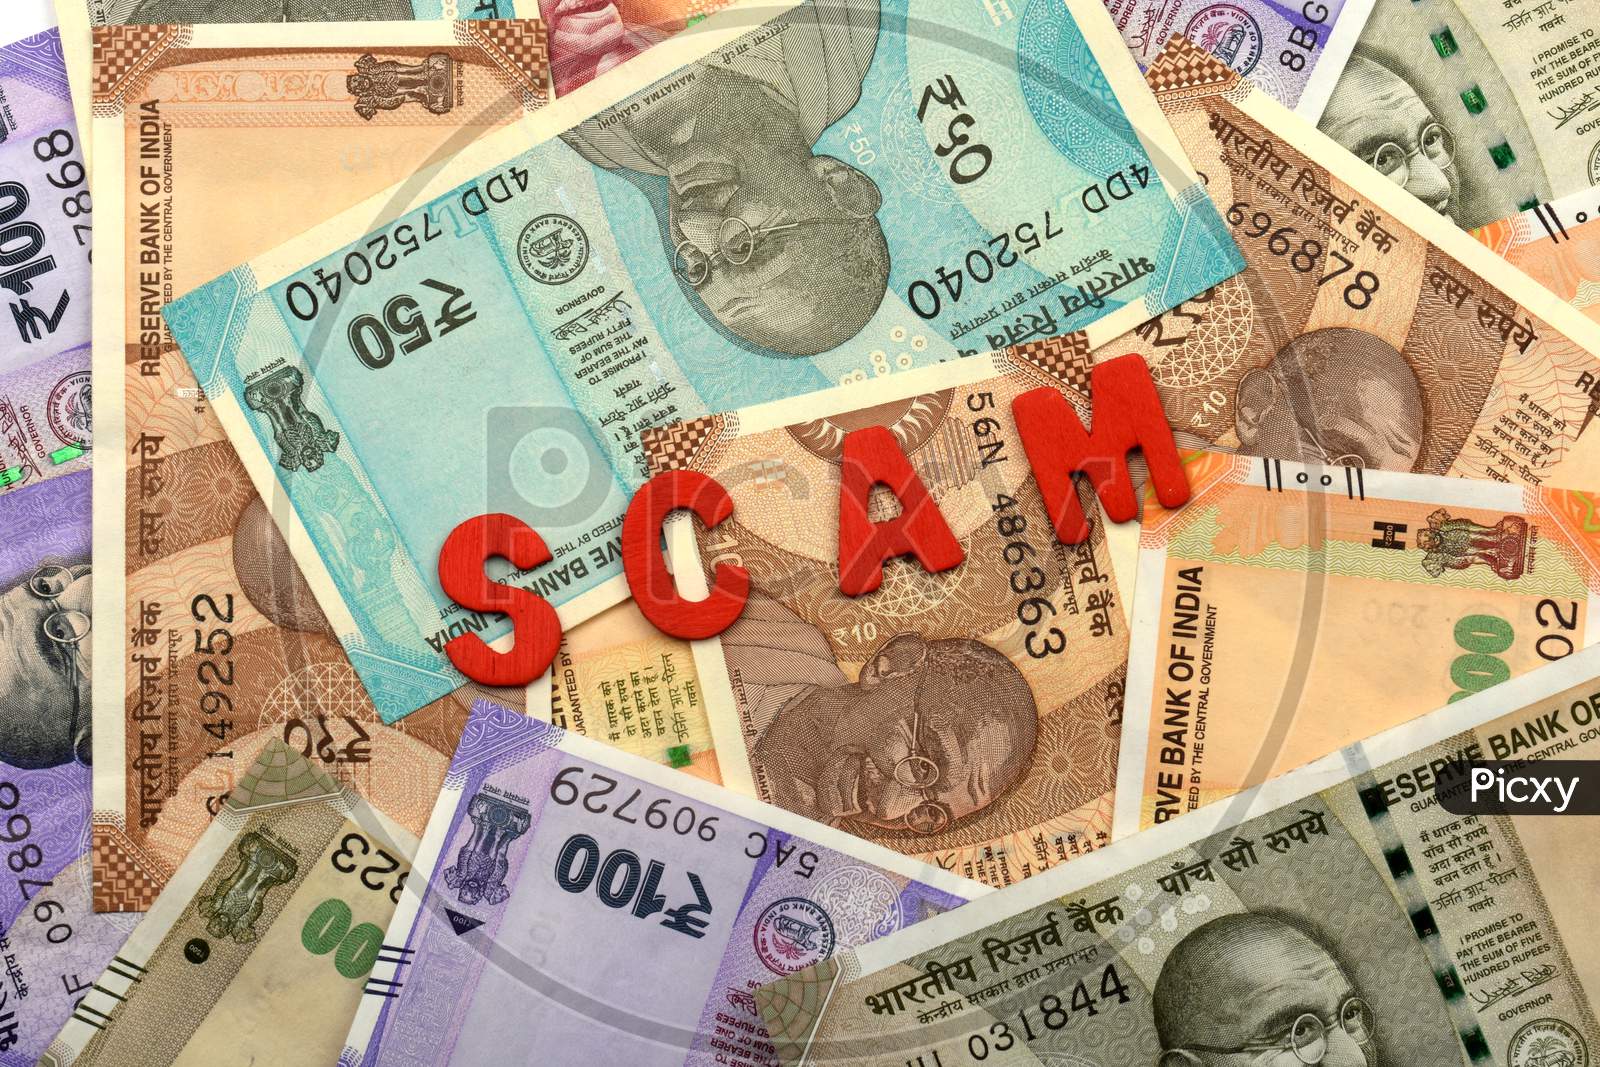 Scam And Money Concept,Scam Red Alphabets On Money Background,Indian Currency, Rupee, Indian Rupee,Indian Money, Business, Finance, Investment, Saving And Corruption Concept